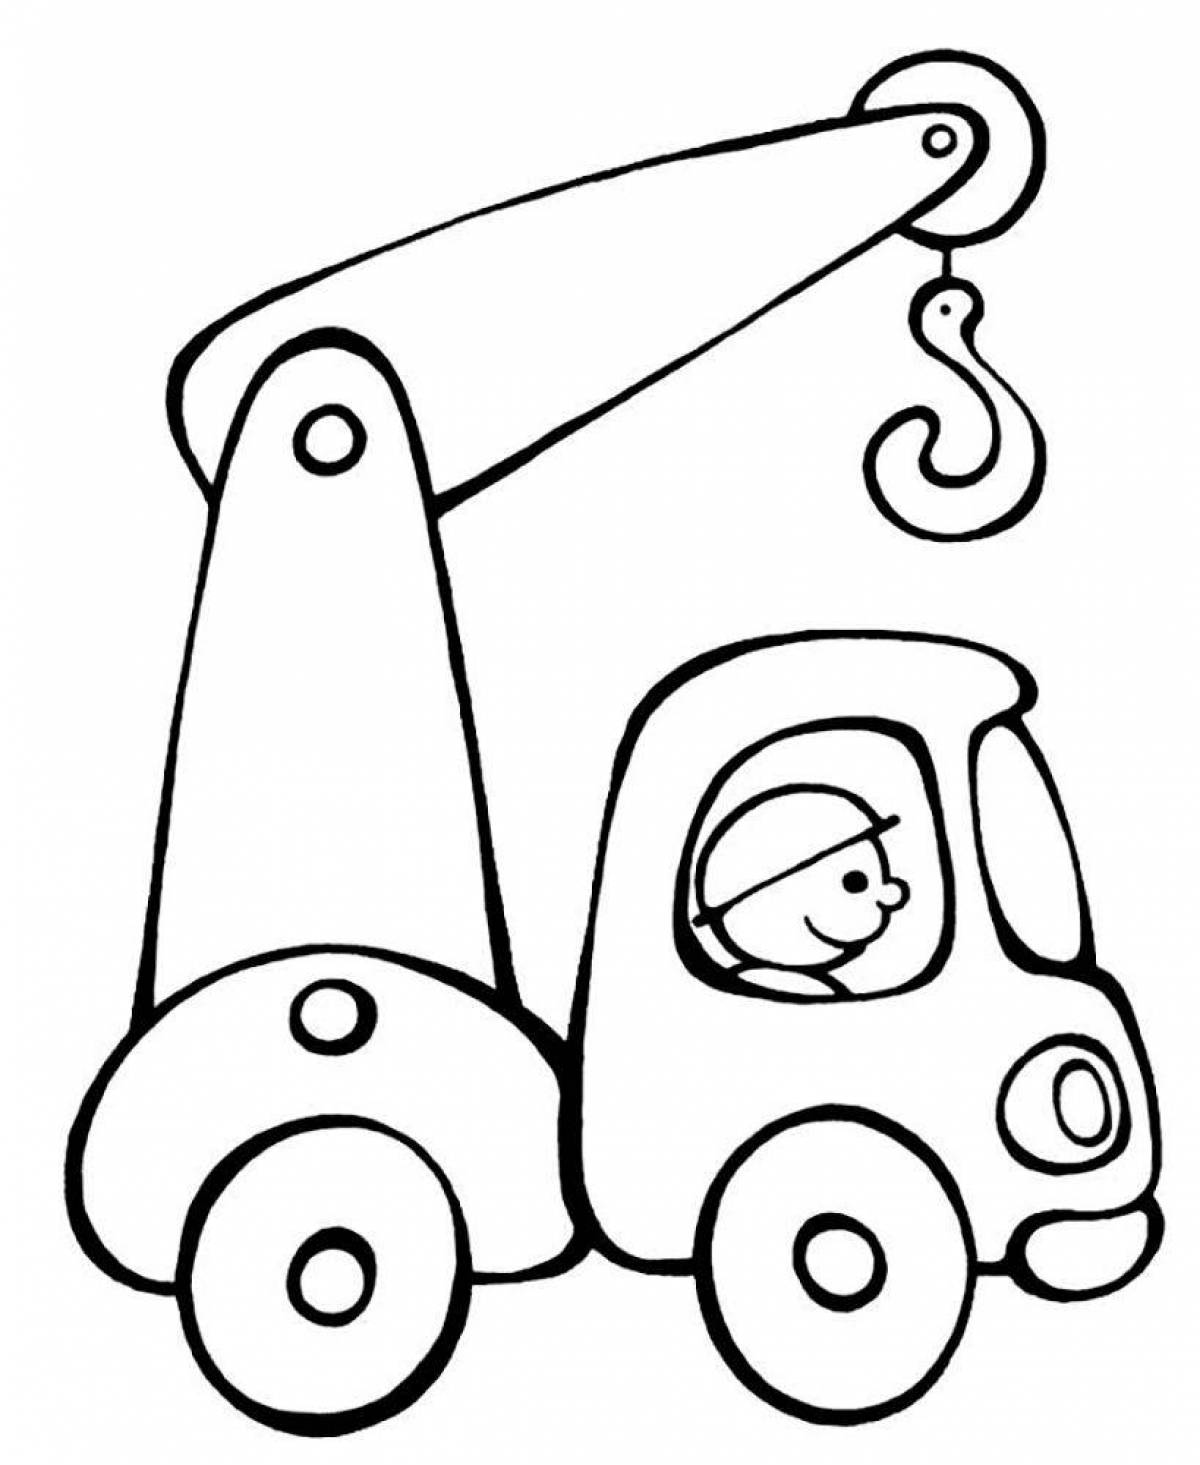 Coloring cars for boys 3-4 years old